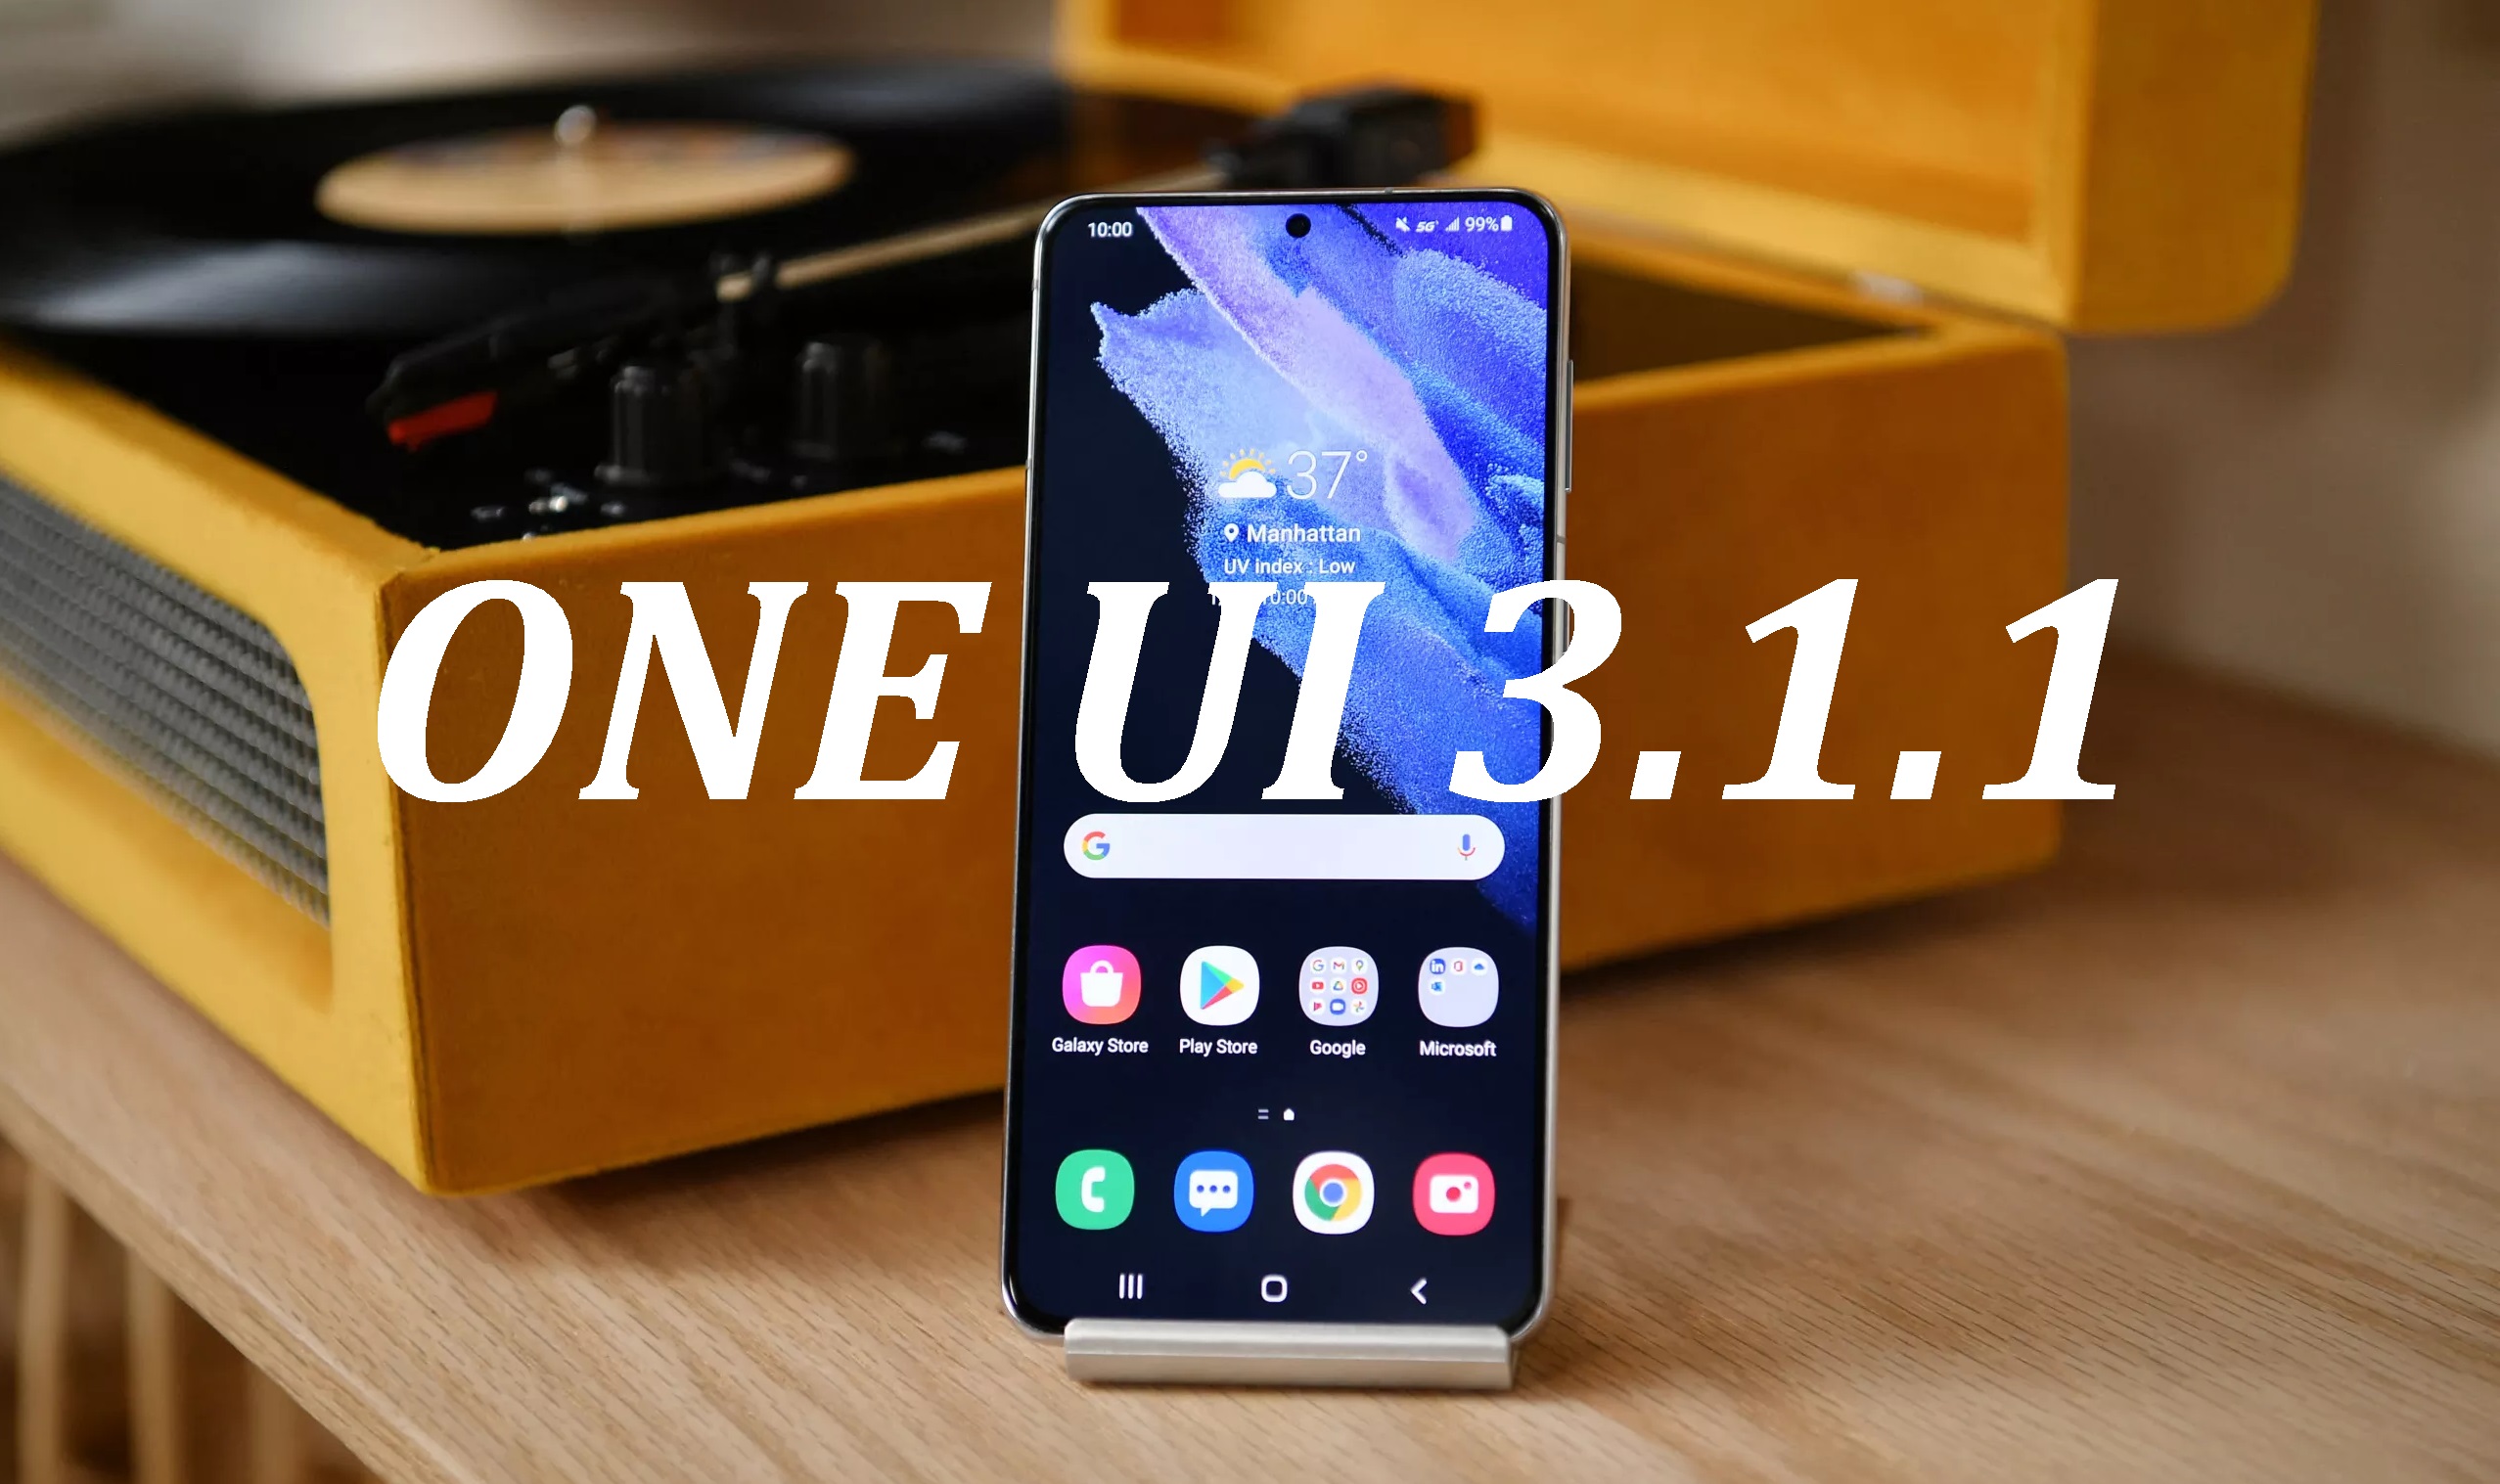 Samsung flagships receive important One UI 3.1 update